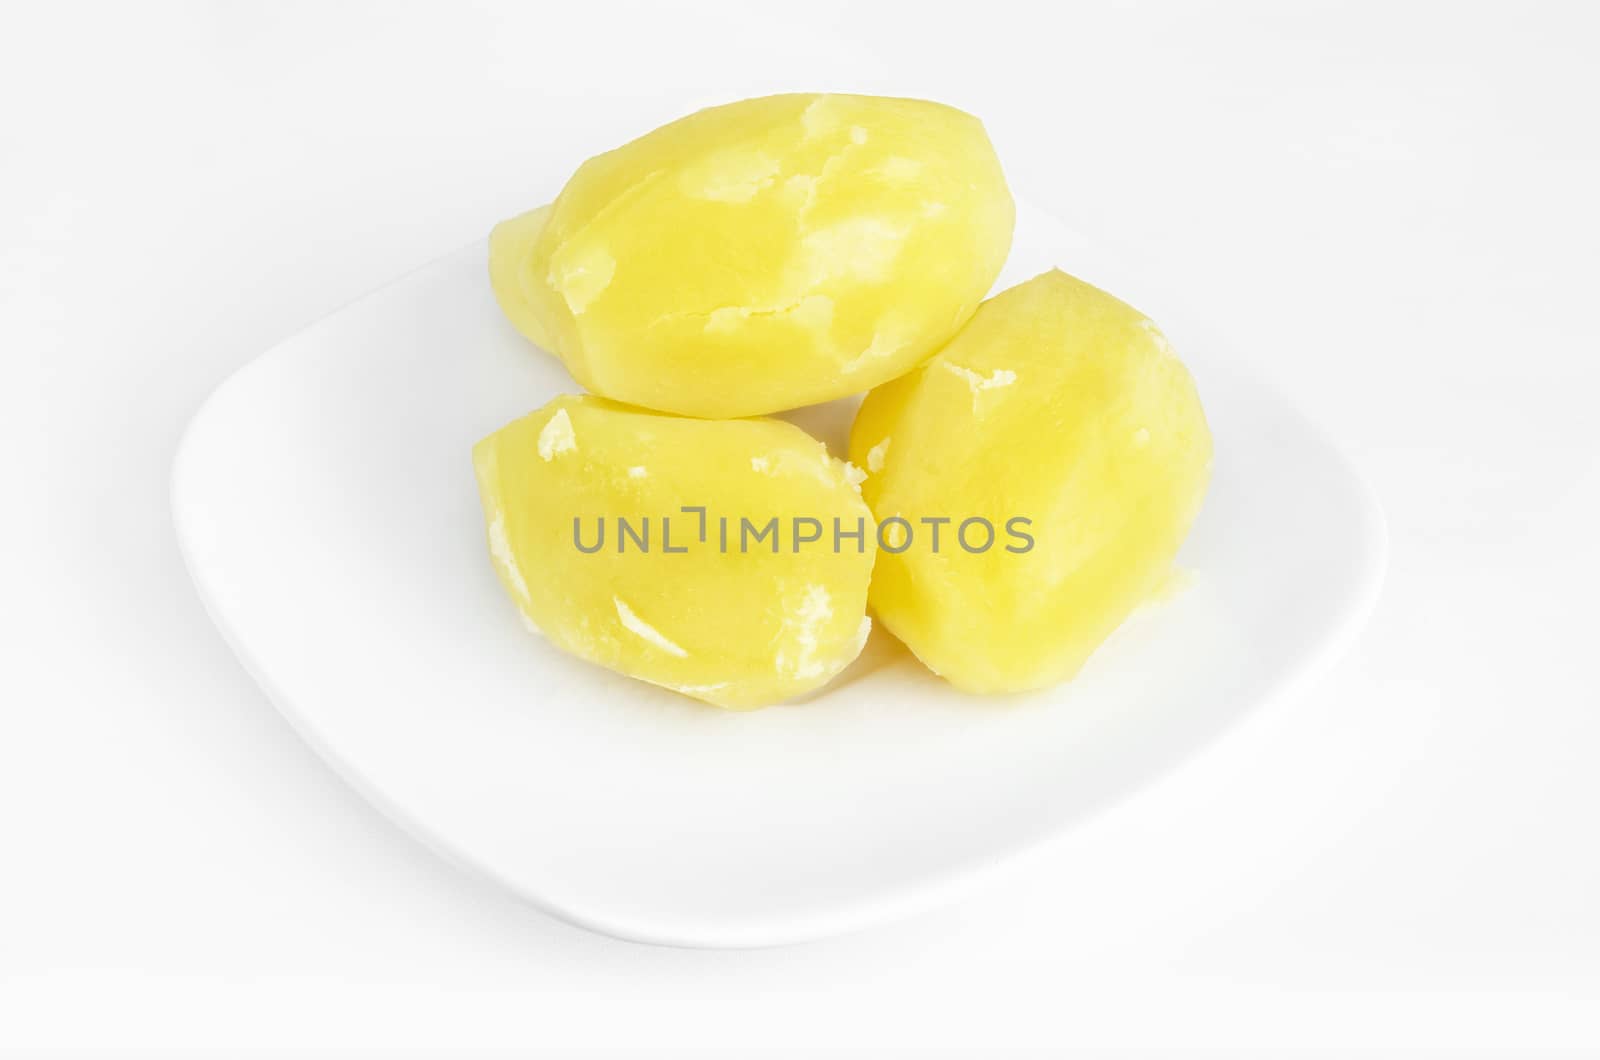 Boiled potatoes on a plate, white background.